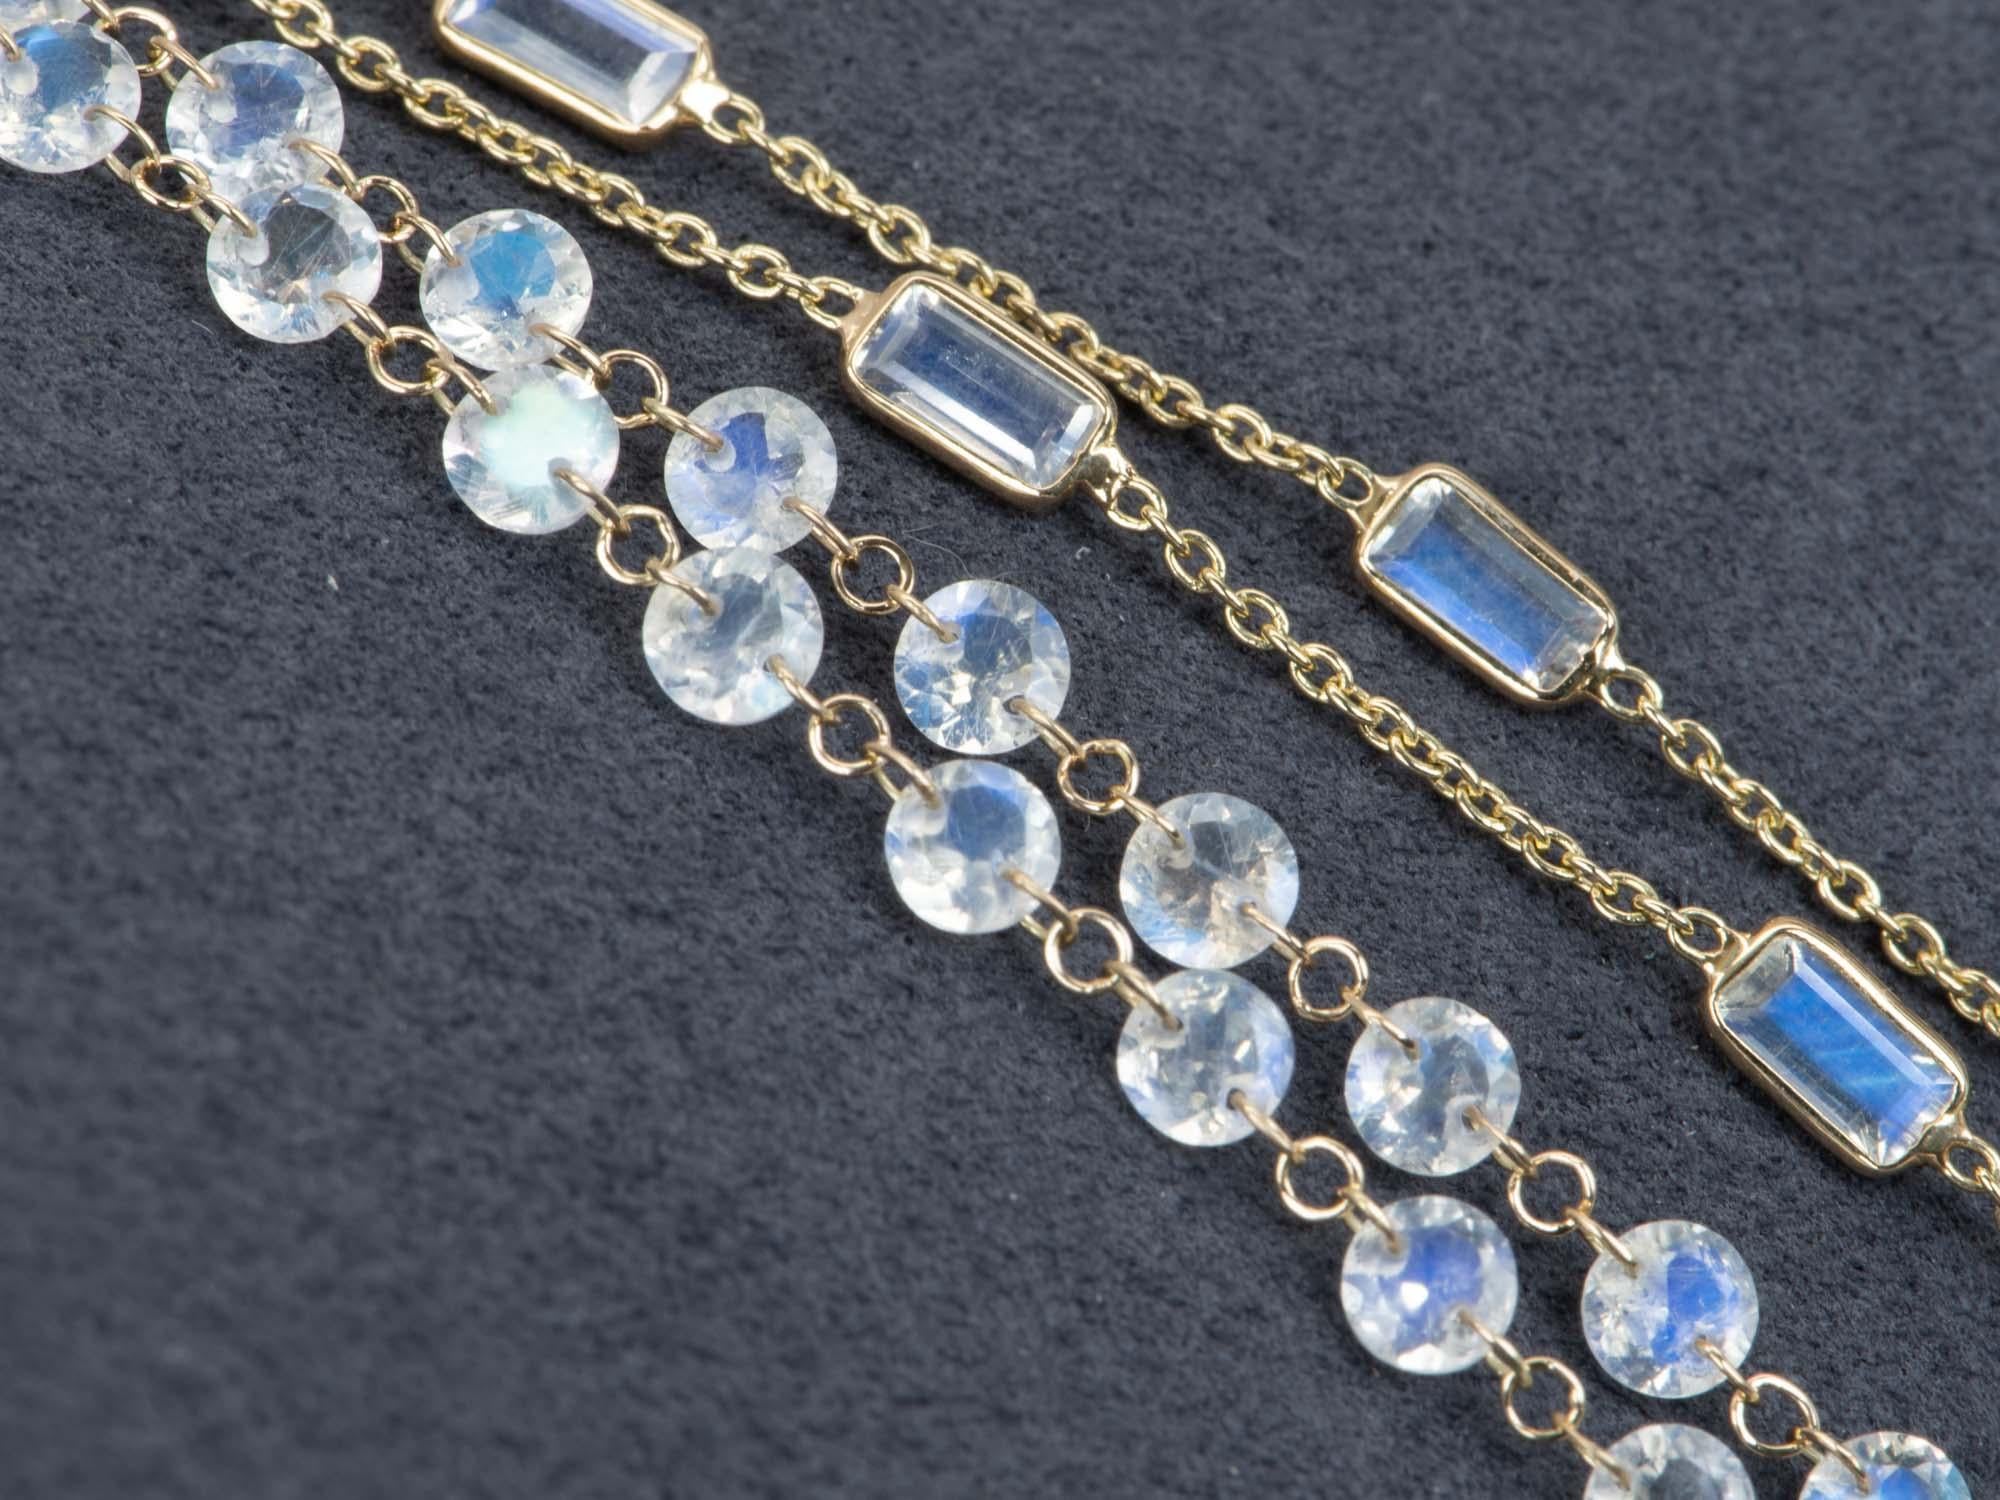 ♥ This is a gorgeous necklace made with high quality rainbow moonstones, each drilled and strung on dainty 14K gold wire
♥ This is a beautiful technique that gives the minimalist look and does not take anything away from the raw beauty of faceted